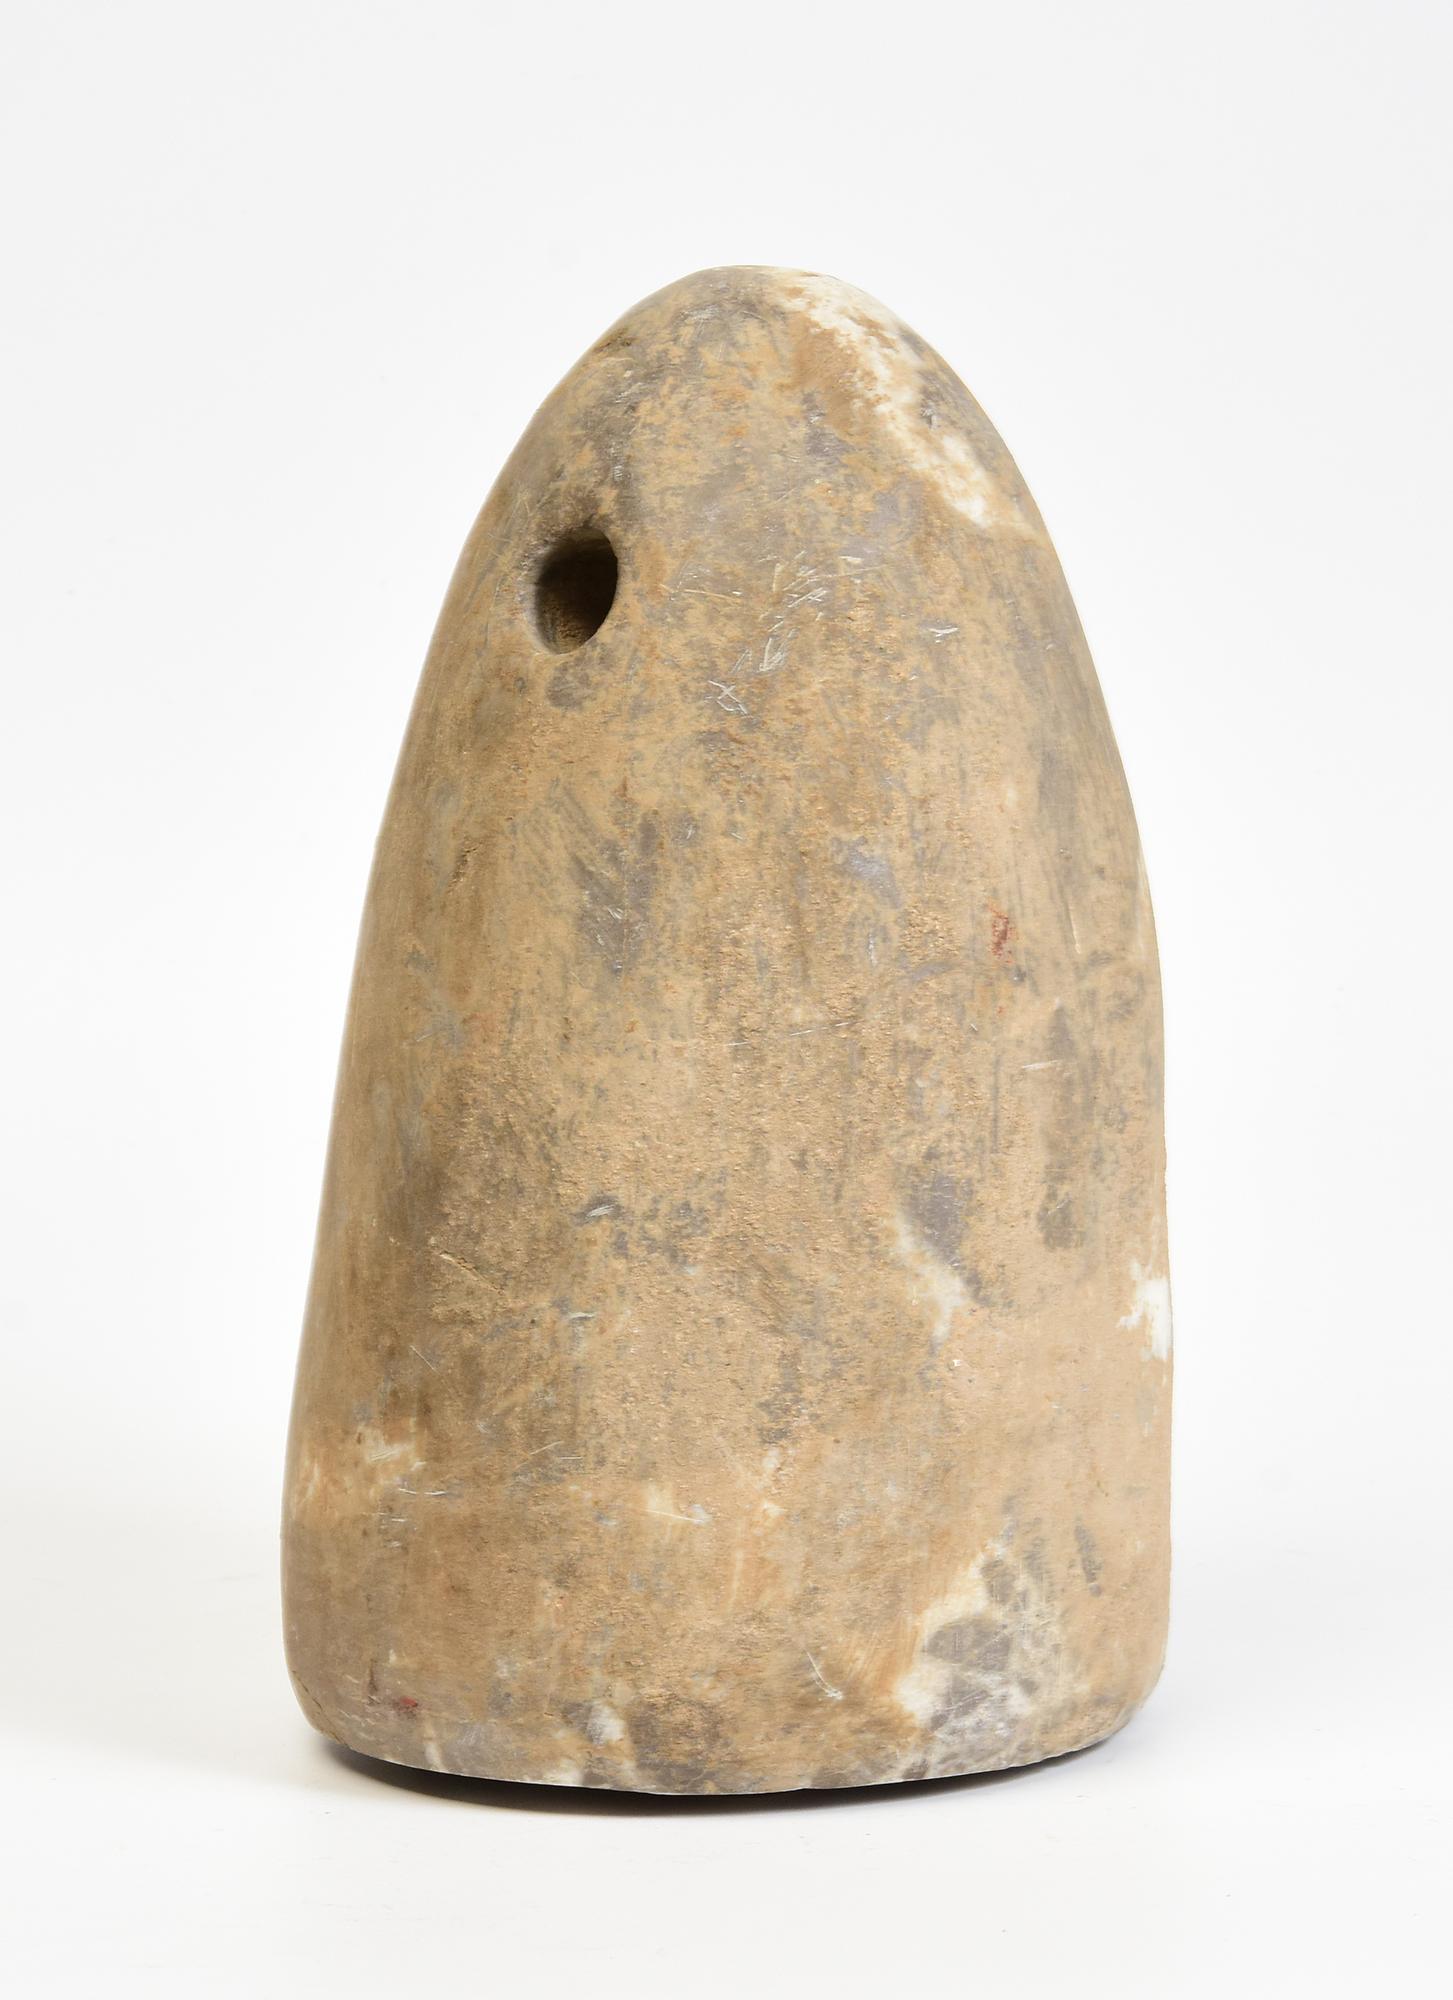 2-3 B.C., Afghanistan, Rare Bactrian Hardstone Weight For Sale 4